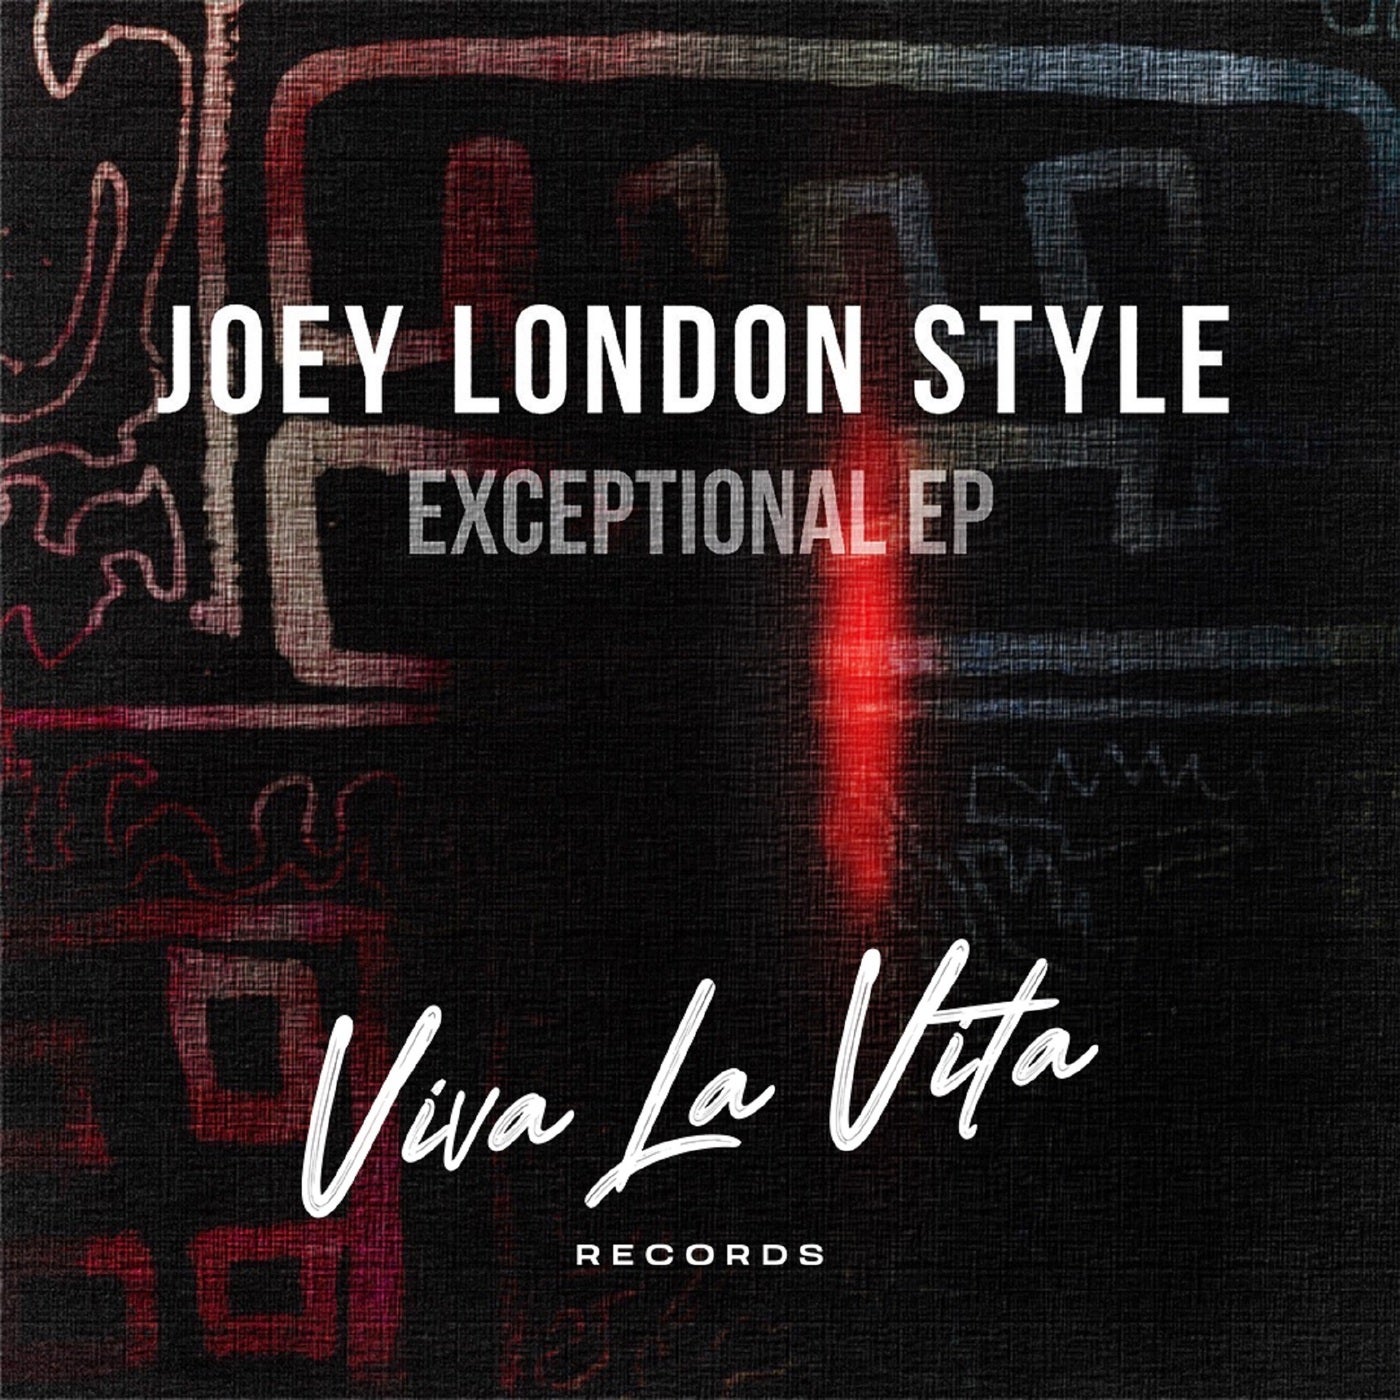 Joey London Style, Taylor Crane – Exceptional EP [VLVR010]